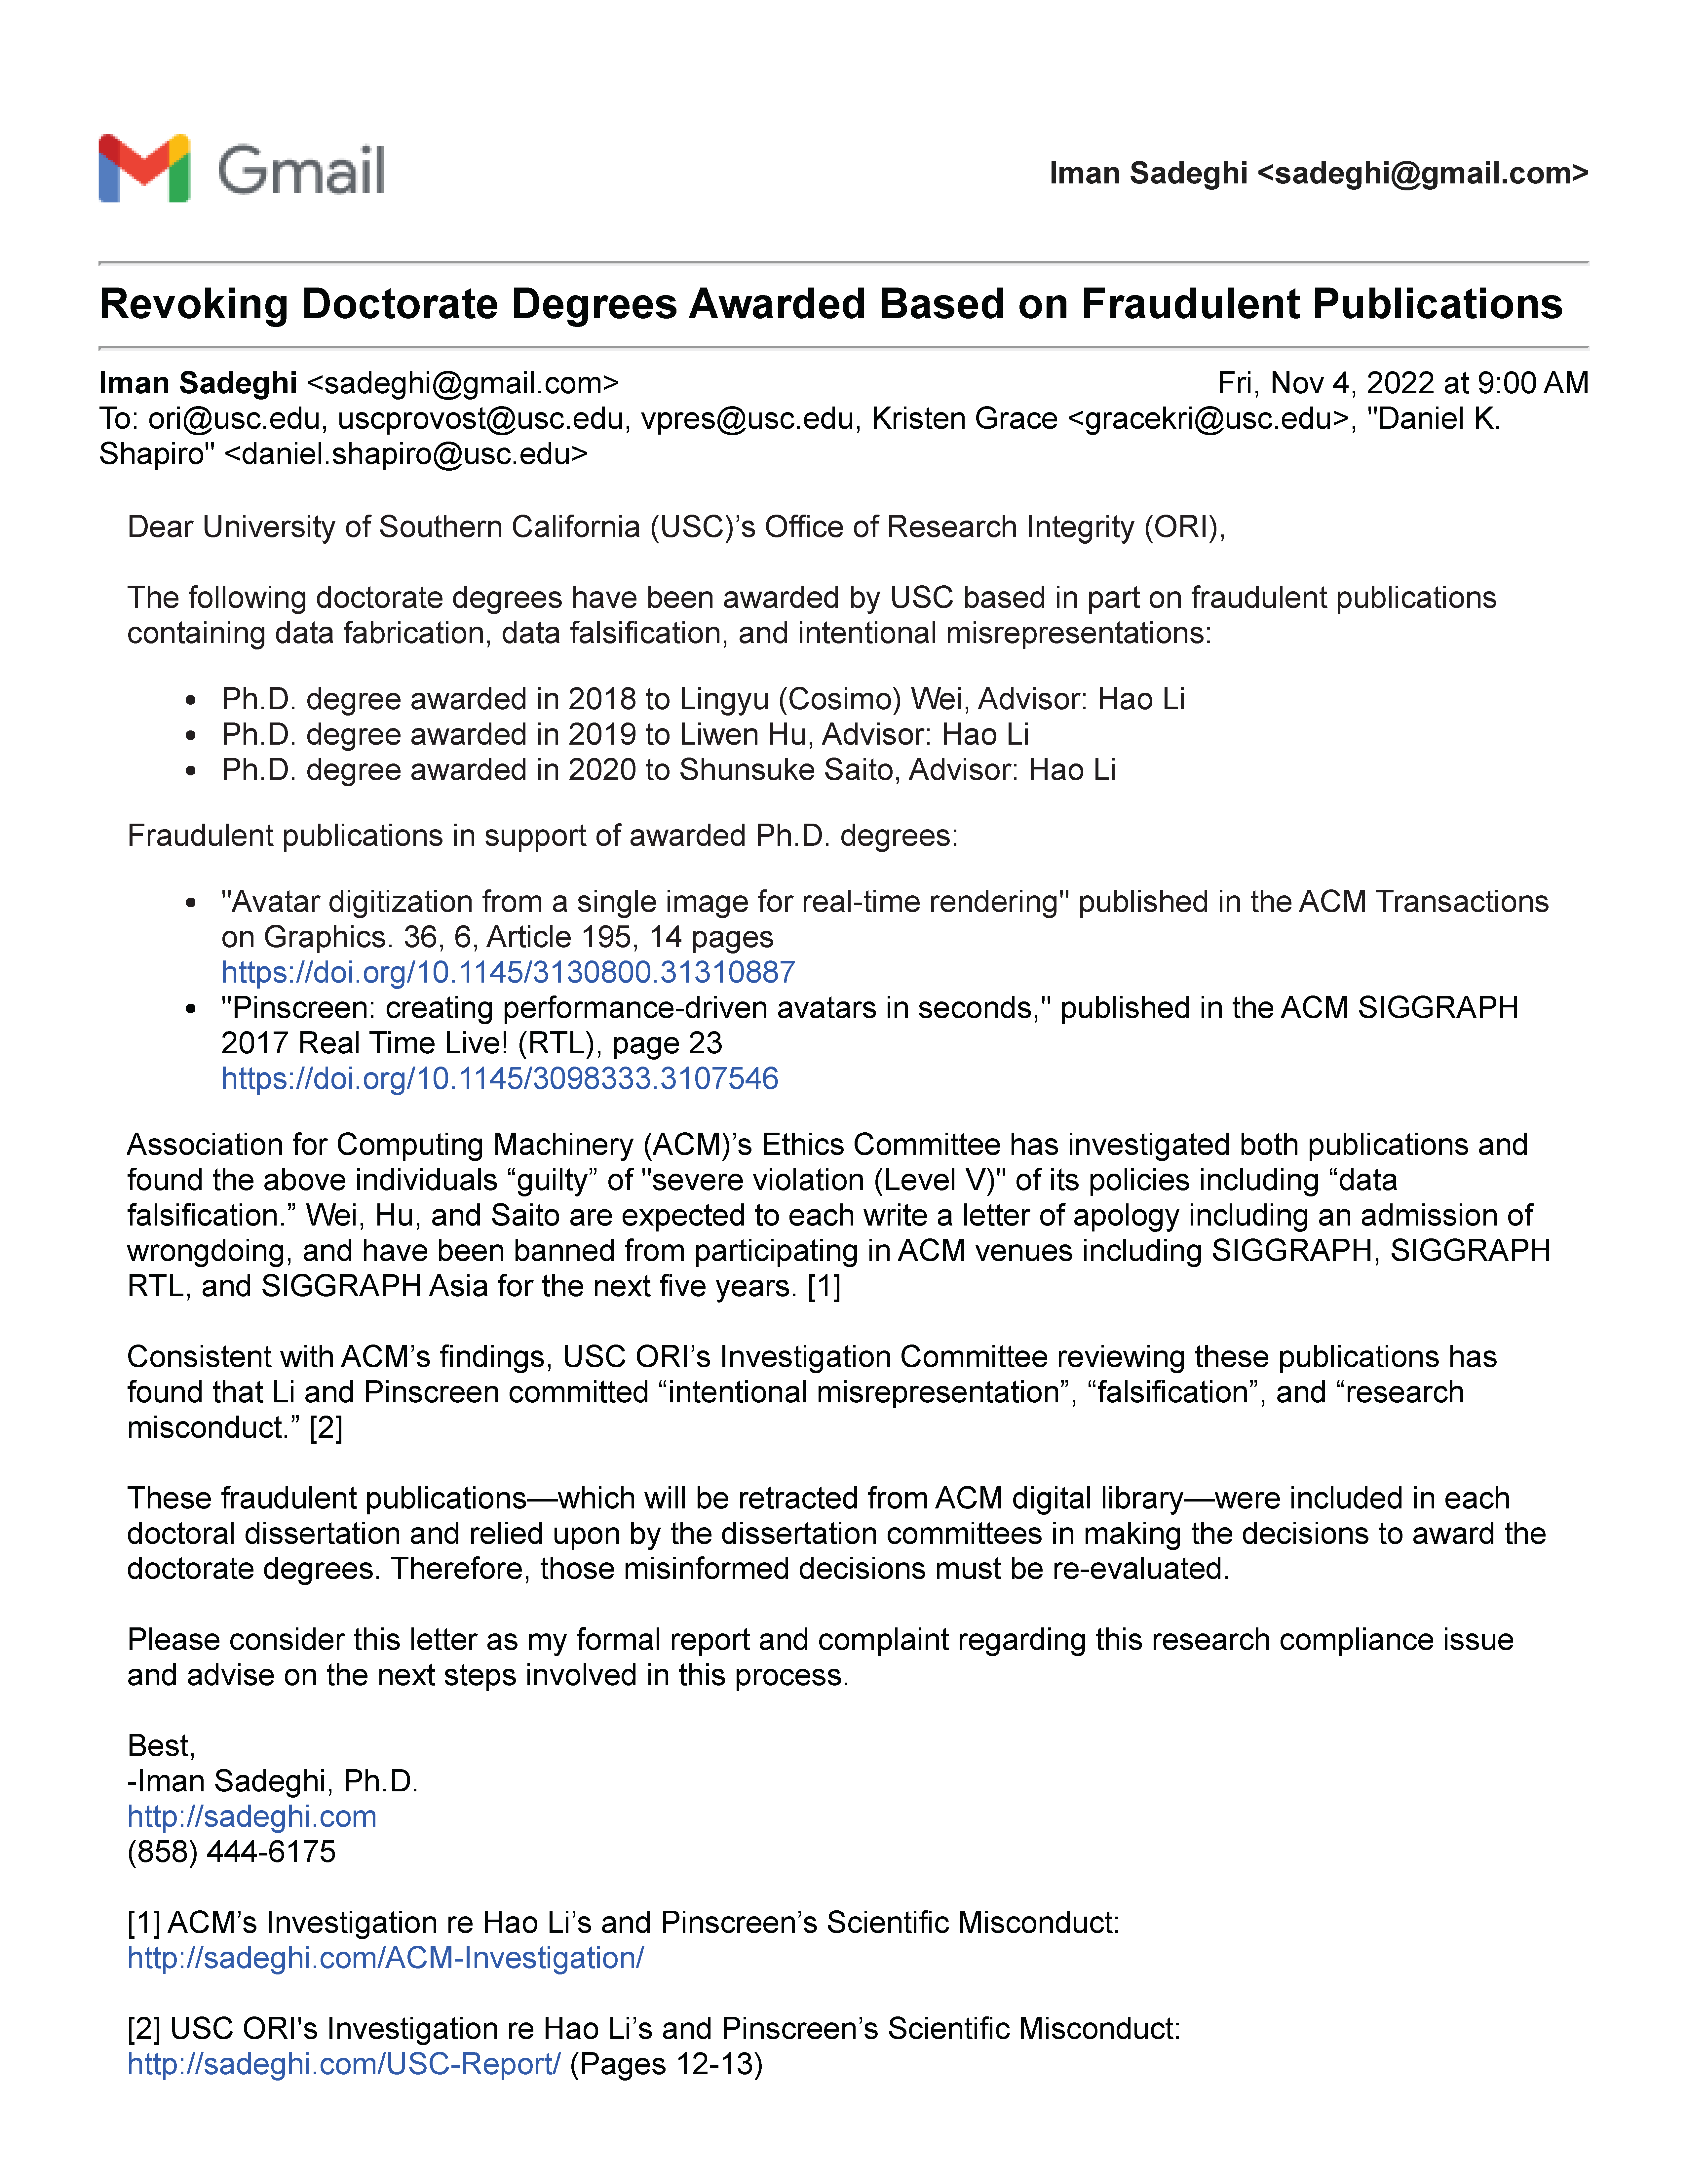 USC Is Considering Revoking Doctorate Degrees Awarded Based on Fraudulent Publications Page 1